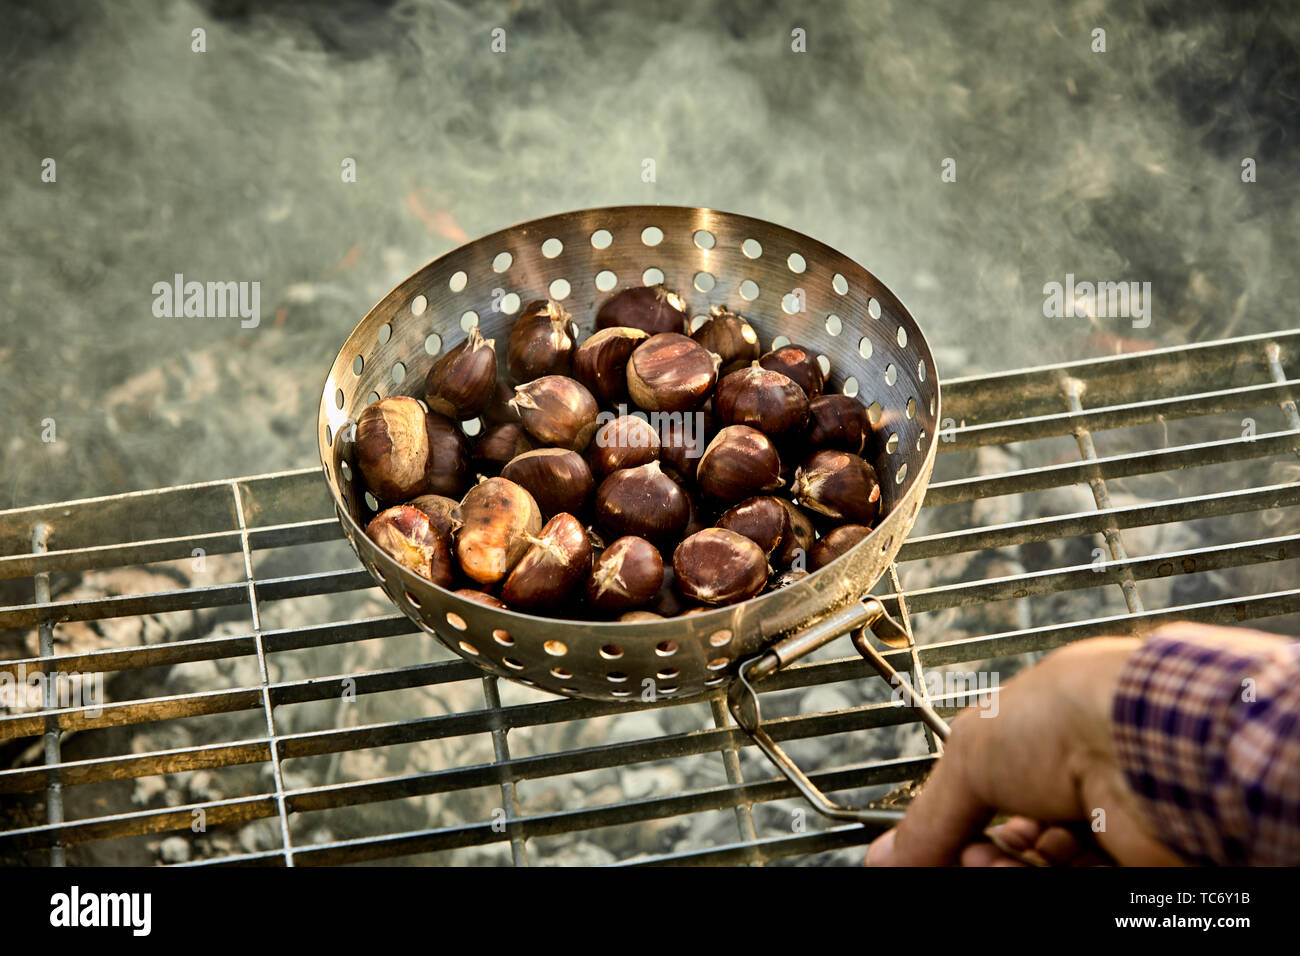 Man roasting a batch of fresh sweet chestnuts on a grill over the hot coals of a barbecue fire in a first person POV Stock Photo